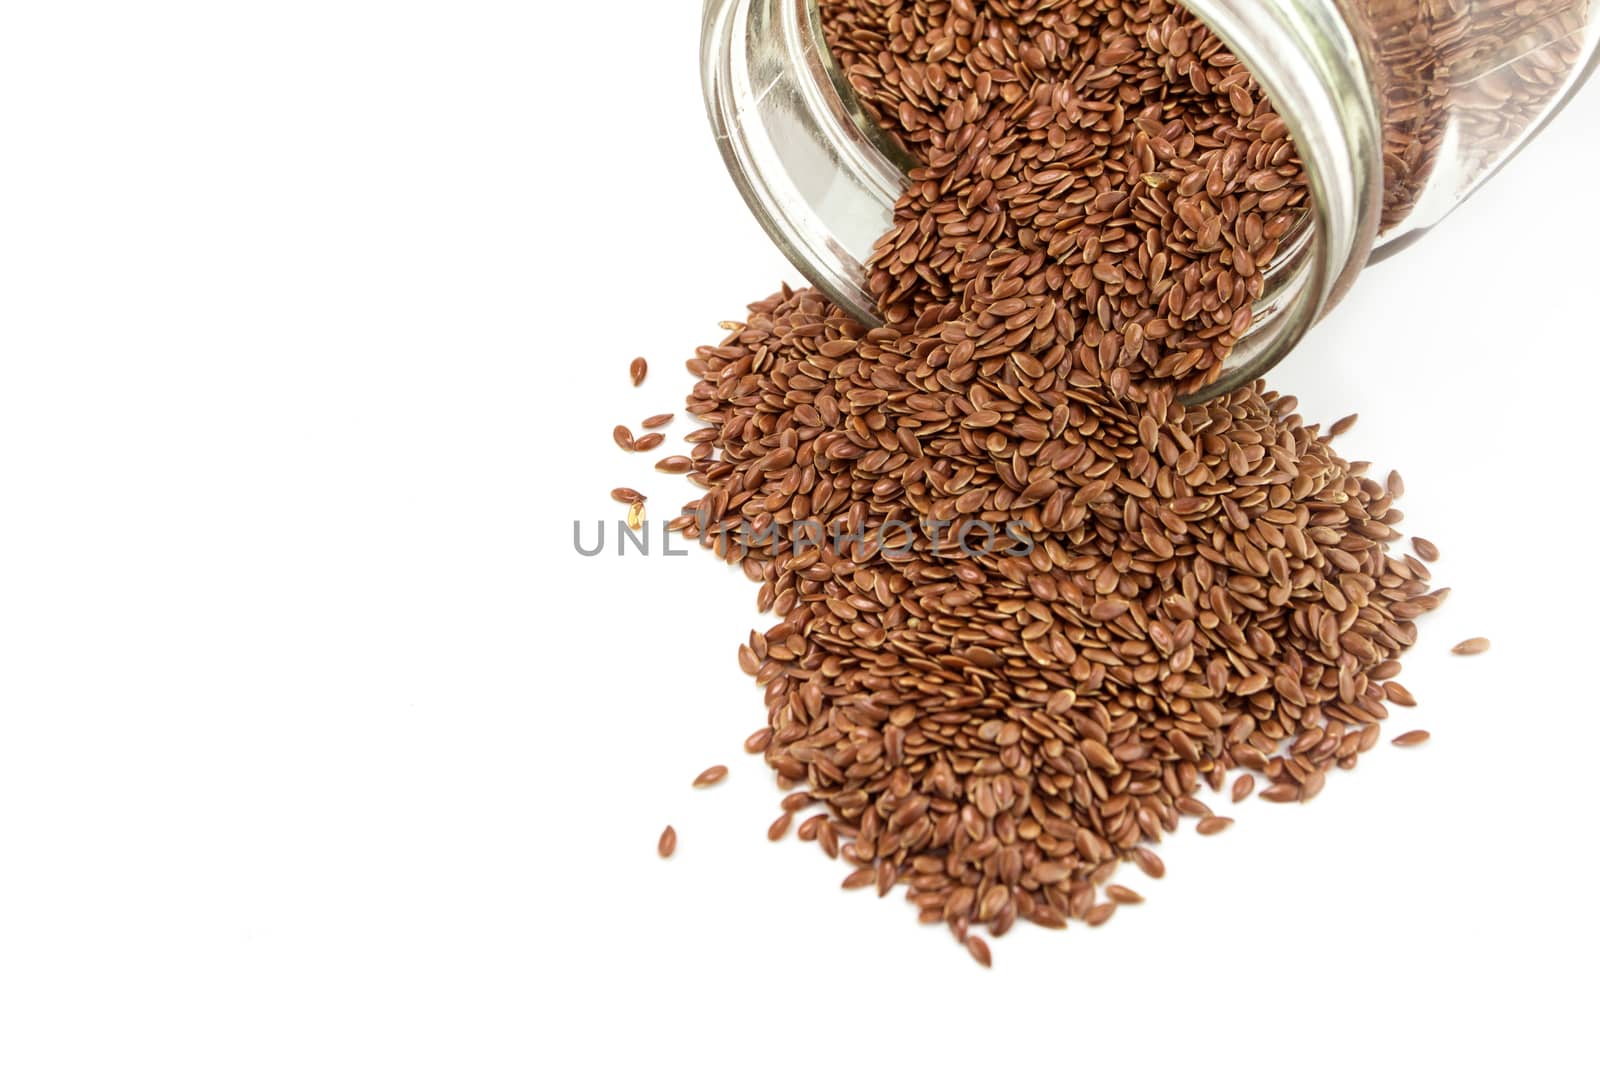 Heap of flaxseed in glass bottle by wyoosumran